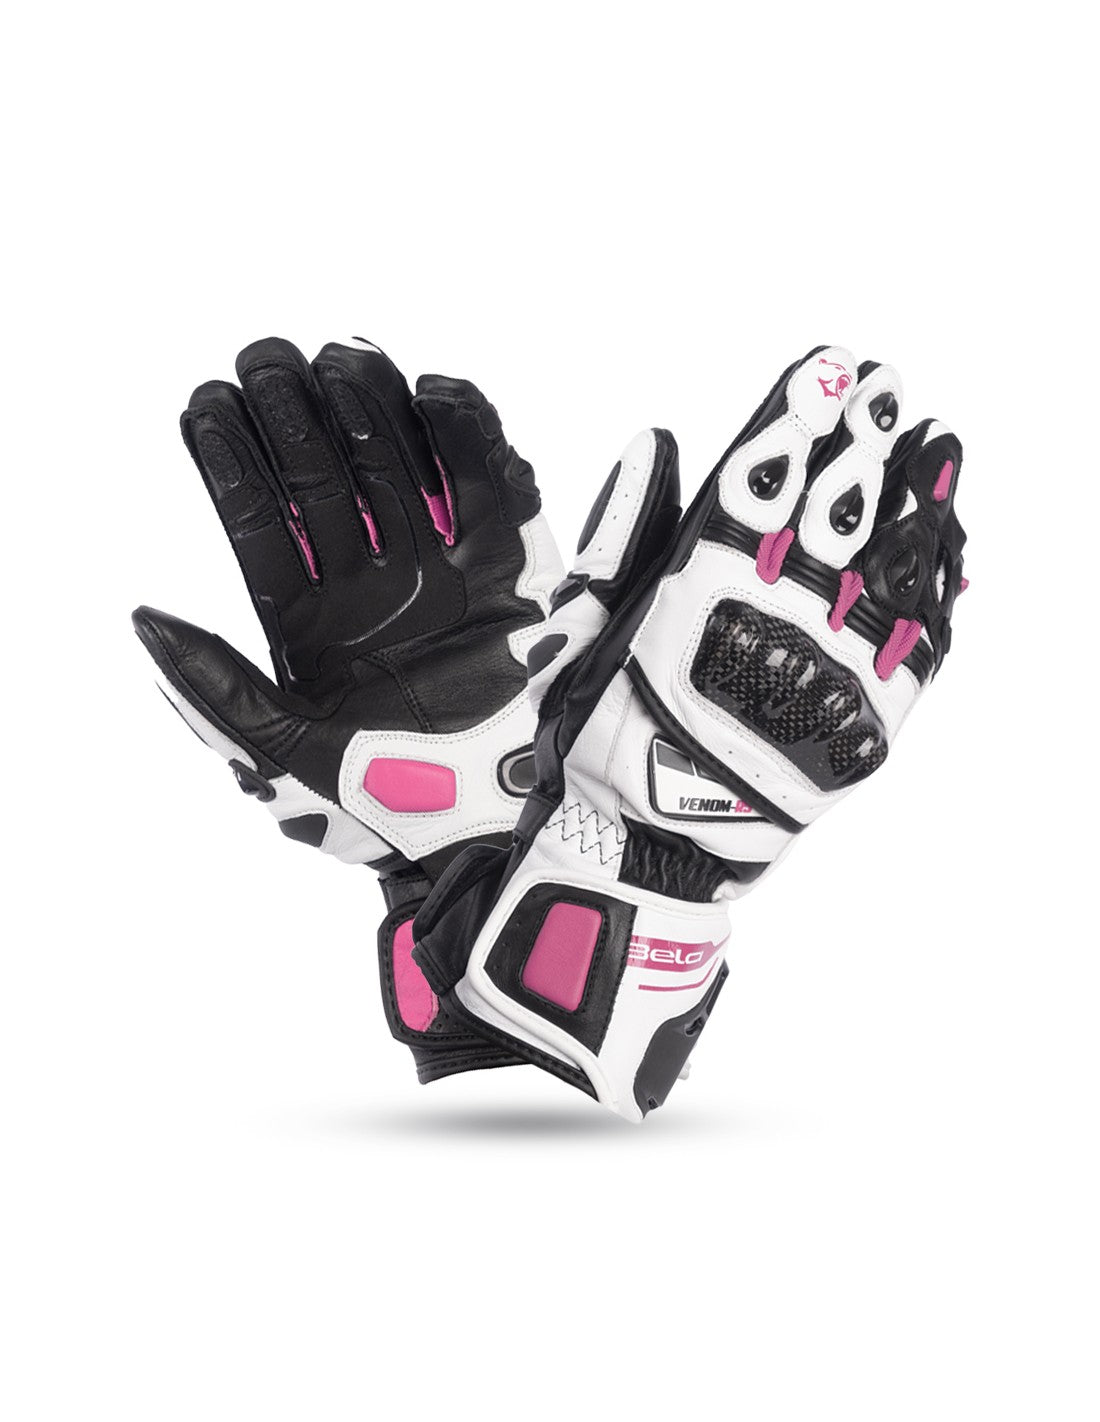 bela venom rs racing lady black, white and pink gloves front and back side view